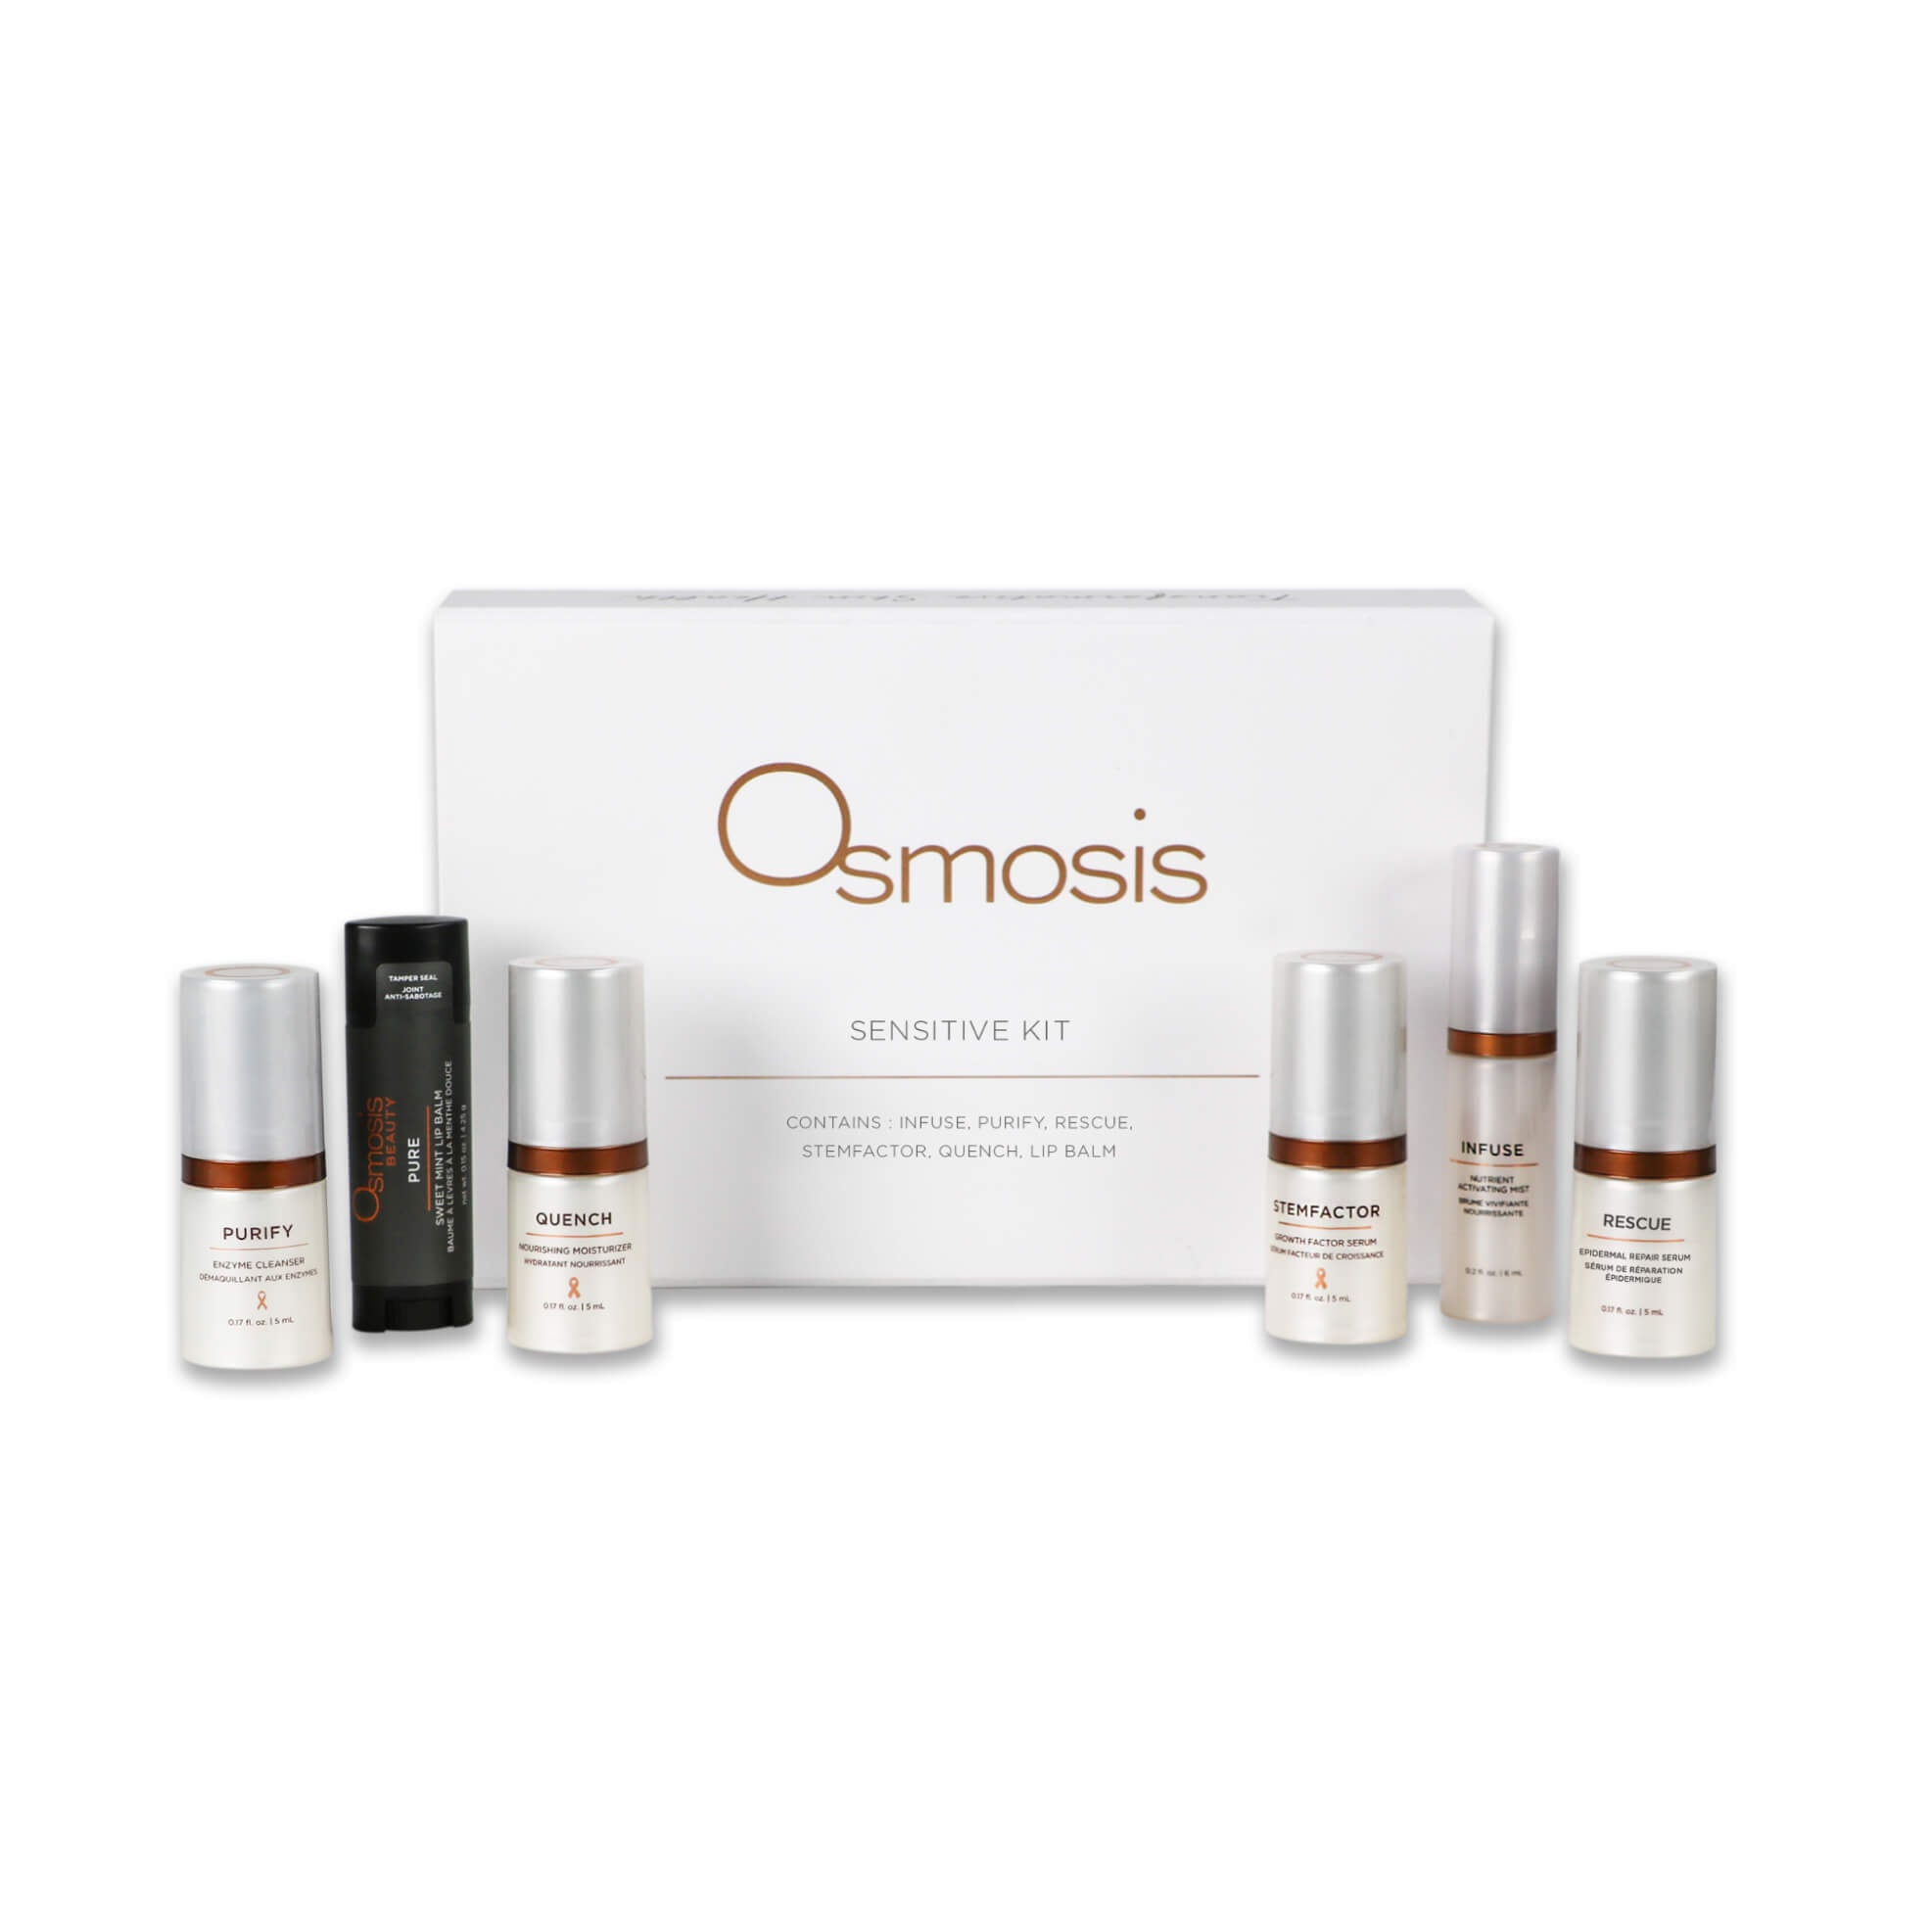 Various osmosis beauty skincare products lined up near box on white background